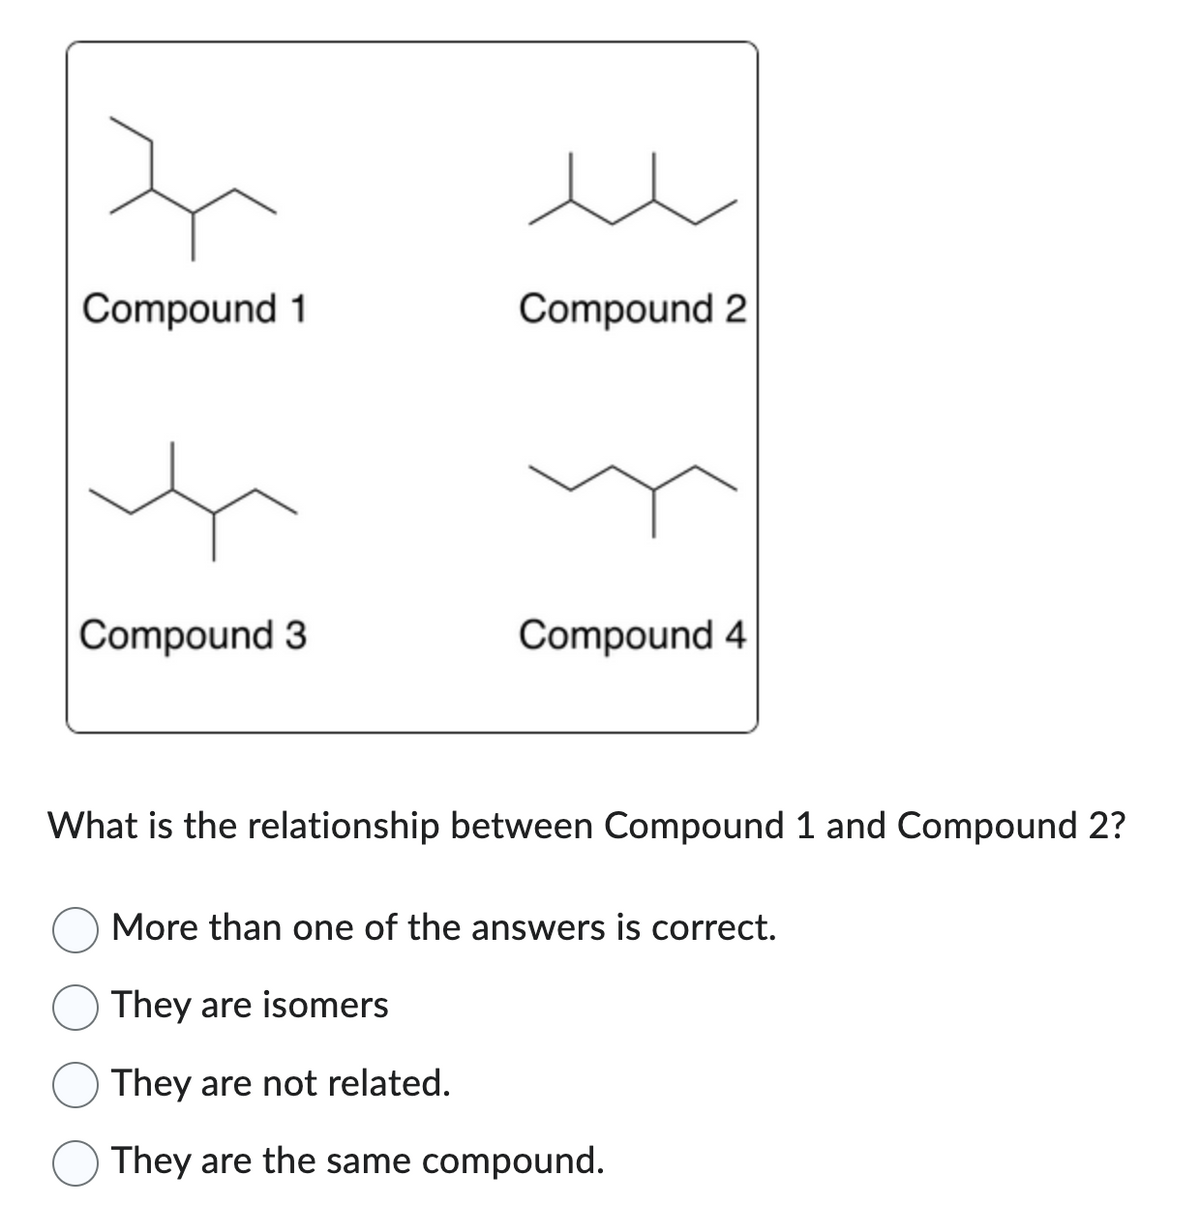 Compound 1
Compound 3
t
Compound 2
}
Compound 4
What is the relationship between Compound 1 and Compound 2?
More than one of the answers is correct.
They are isomers
They are not related.
They are the same compound.